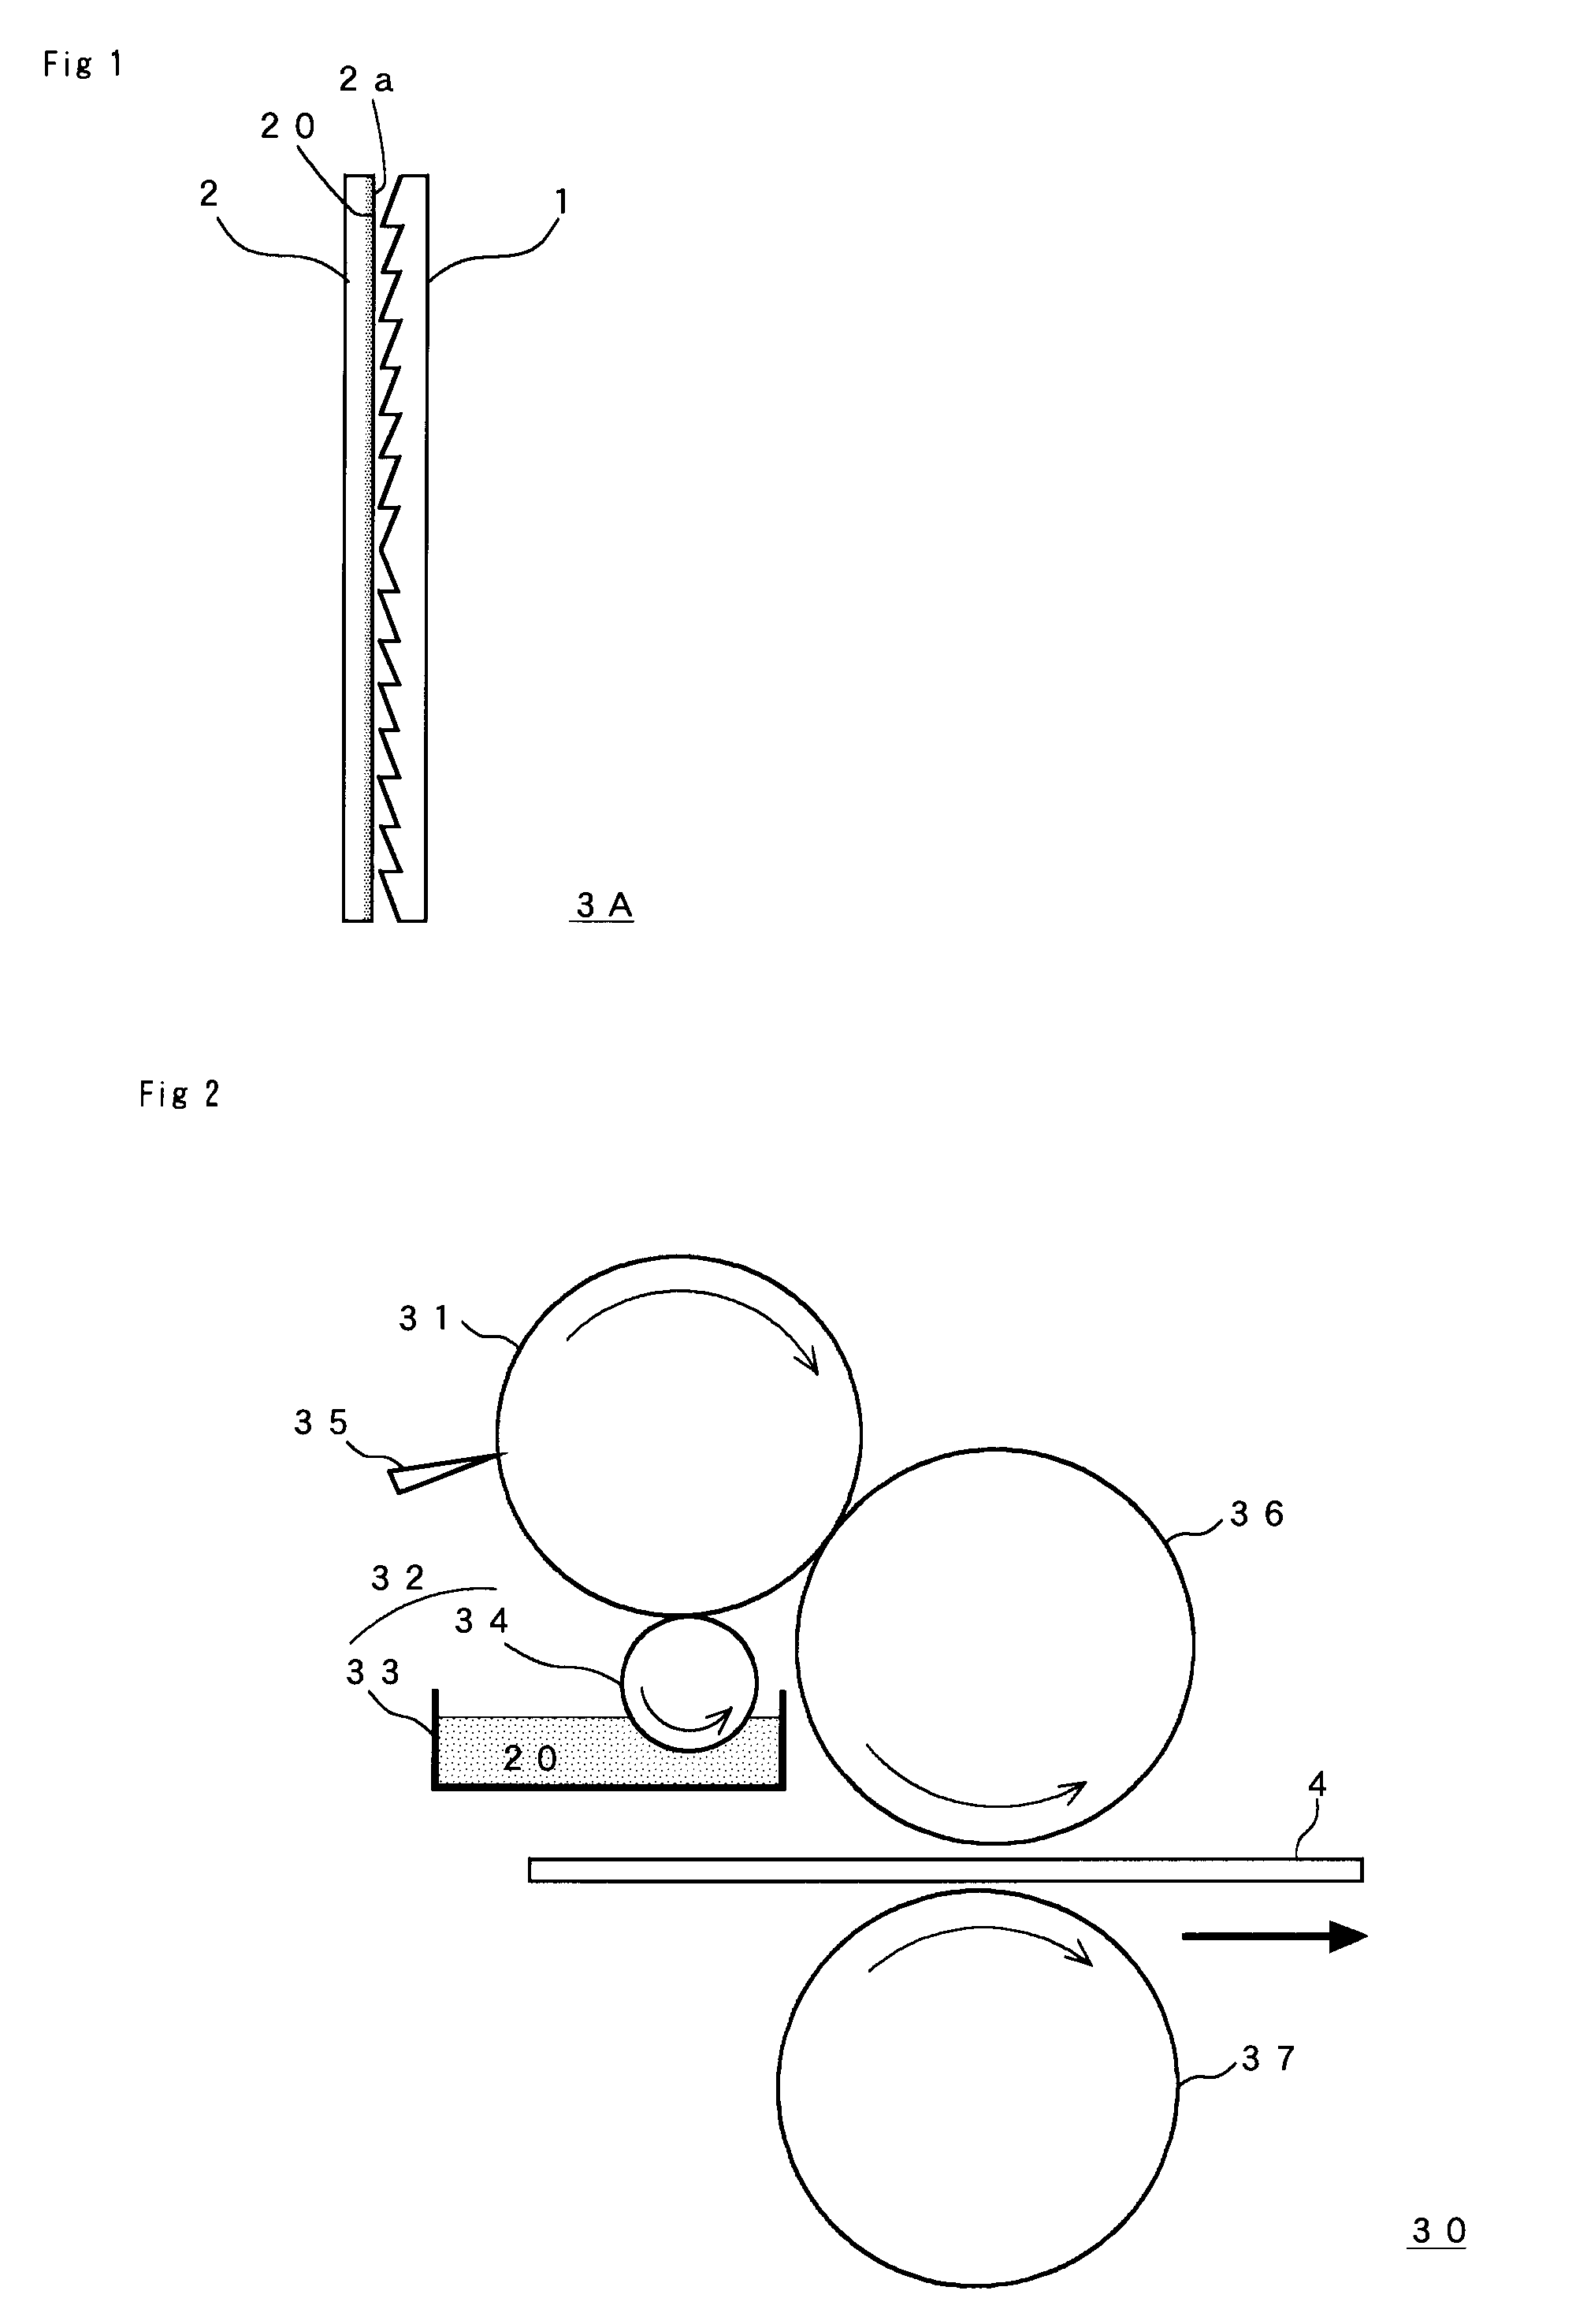 Optical device and coating applicator